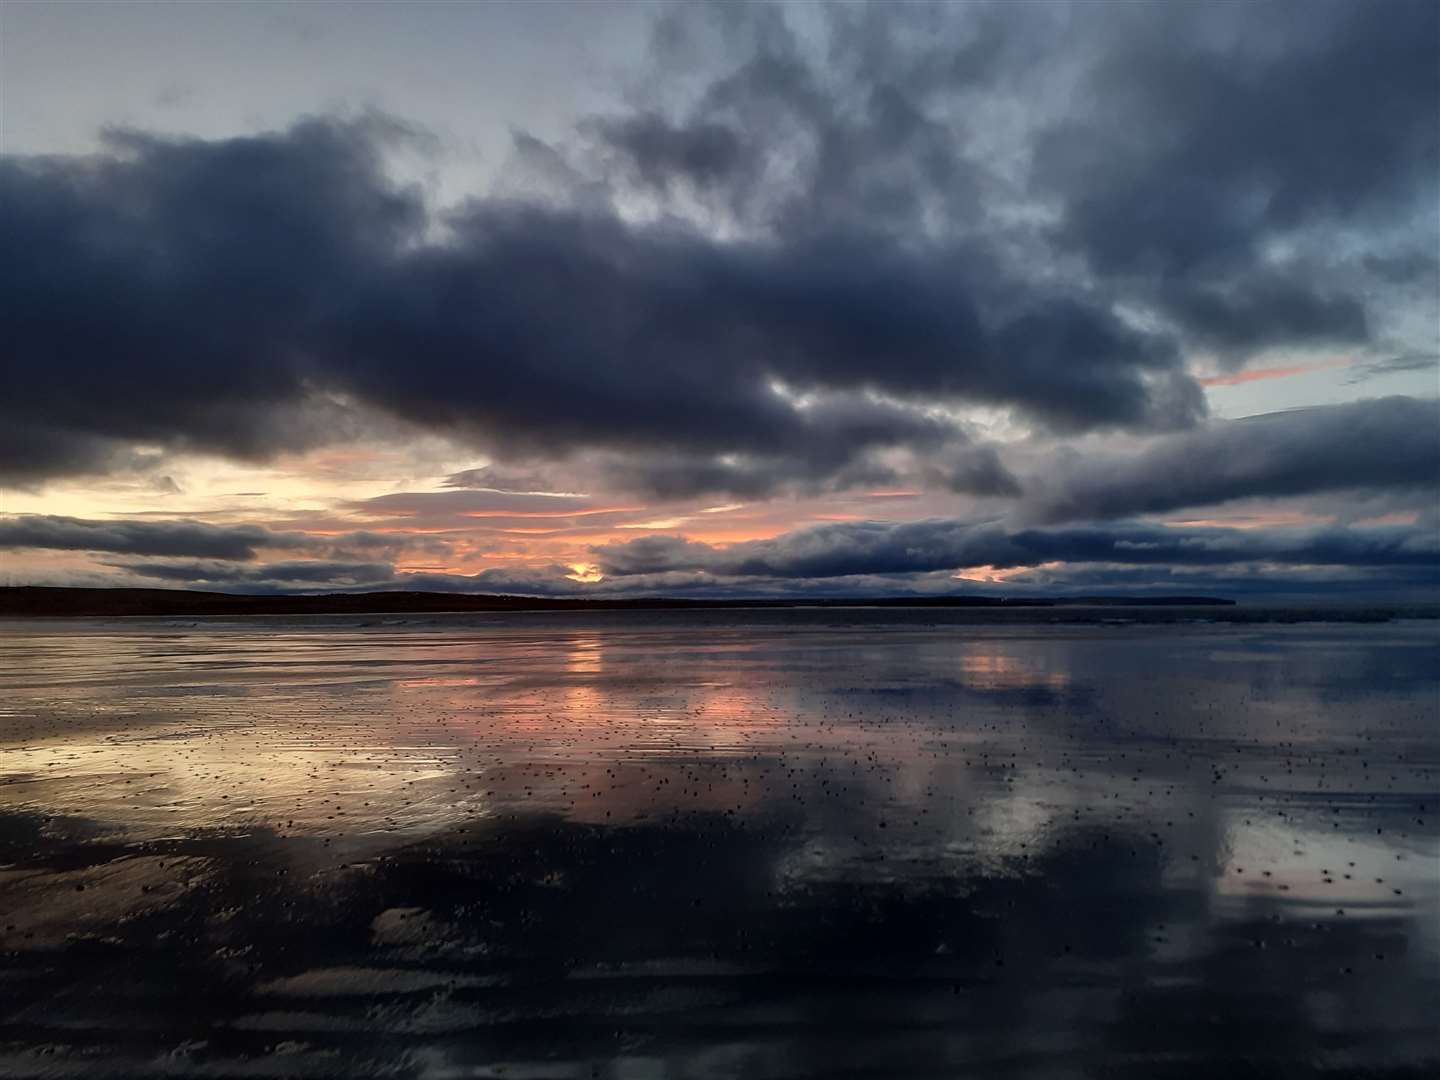 Wendy Hedgecock, of Mey, sent this photograph. 'The changing light and reflections at Dunnet beach were so beautiful,' she said.